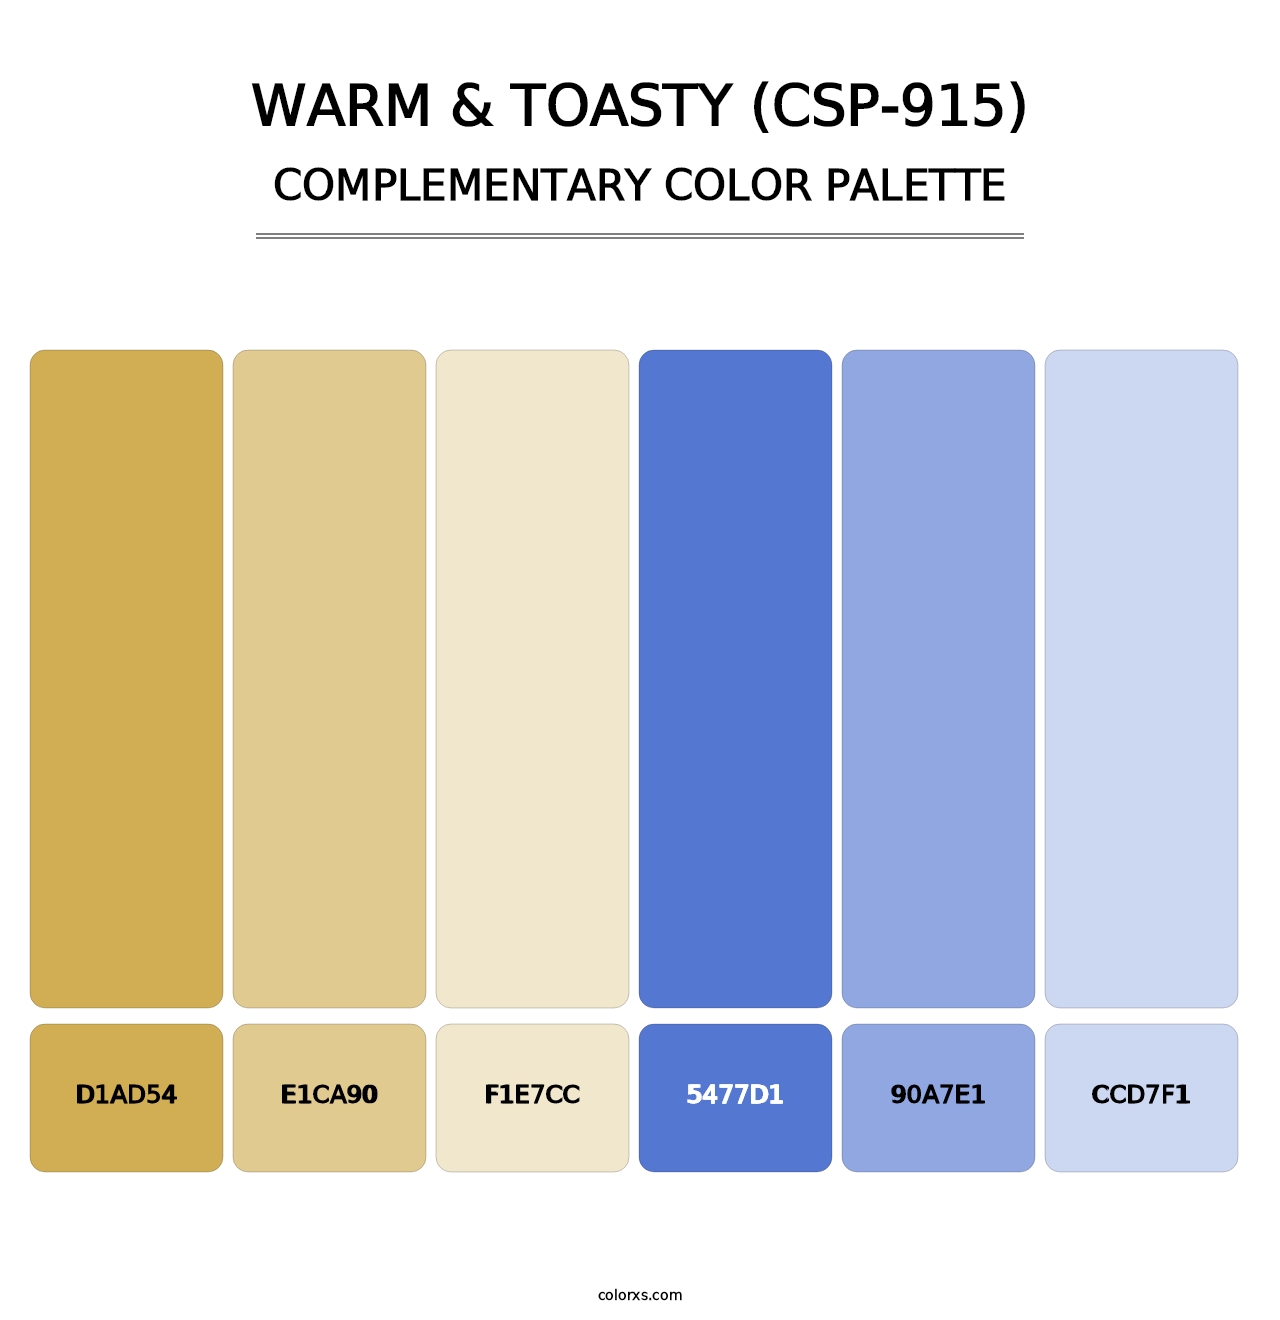 Warm & Toasty (CSP-915) - Complementary Color Palette